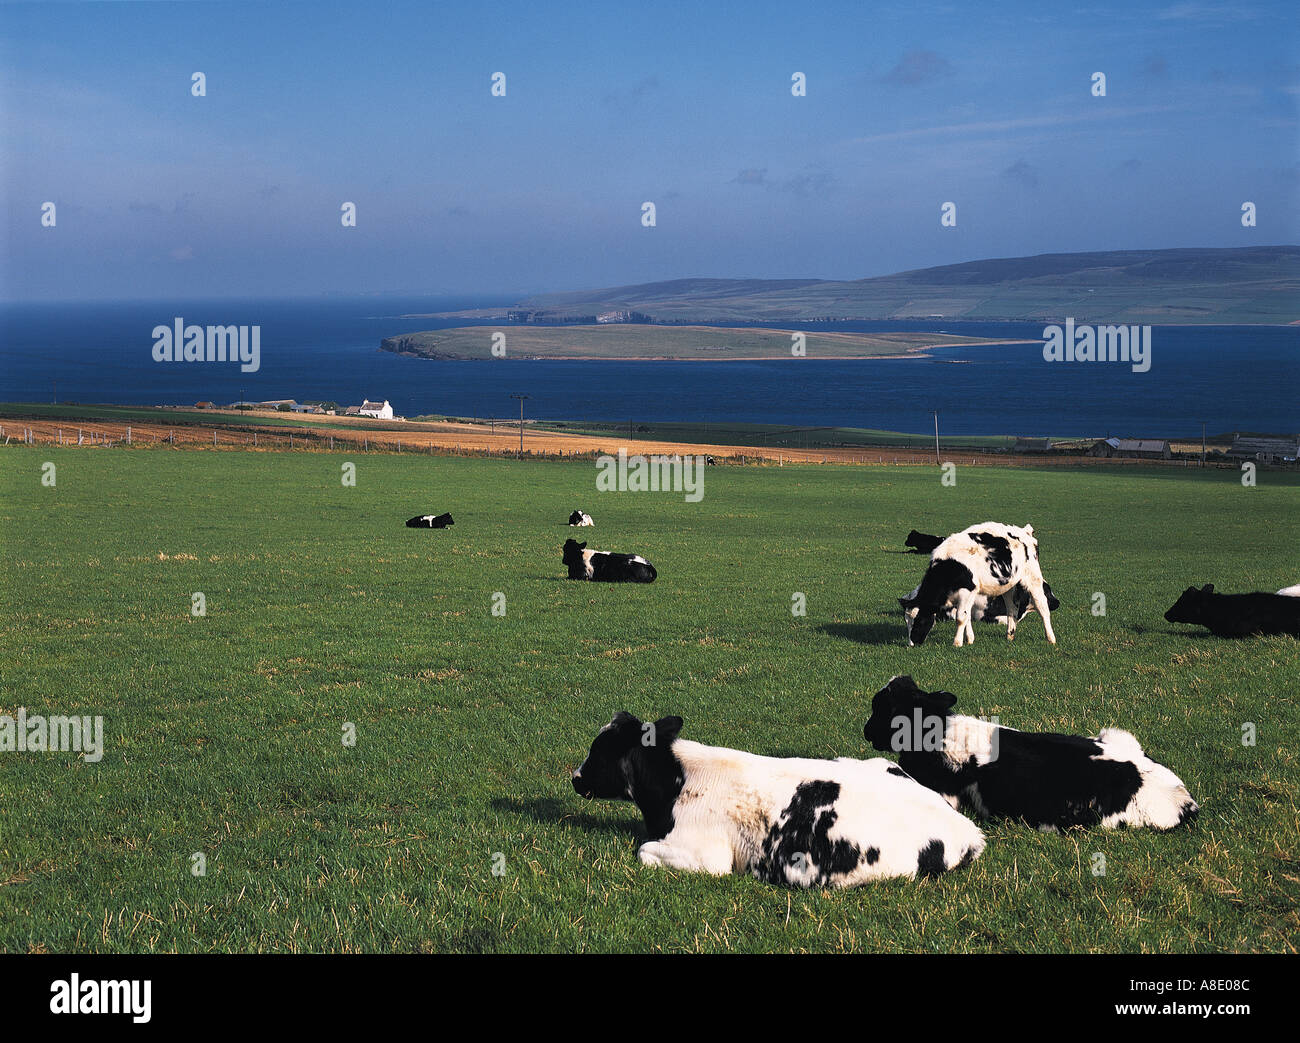 dh Friesian dairy cattle EVIE UK A Scottish cow herd grazing in field cows Scotland sit down on grass Eynhallow Sound blue sky green fields Stock Photo